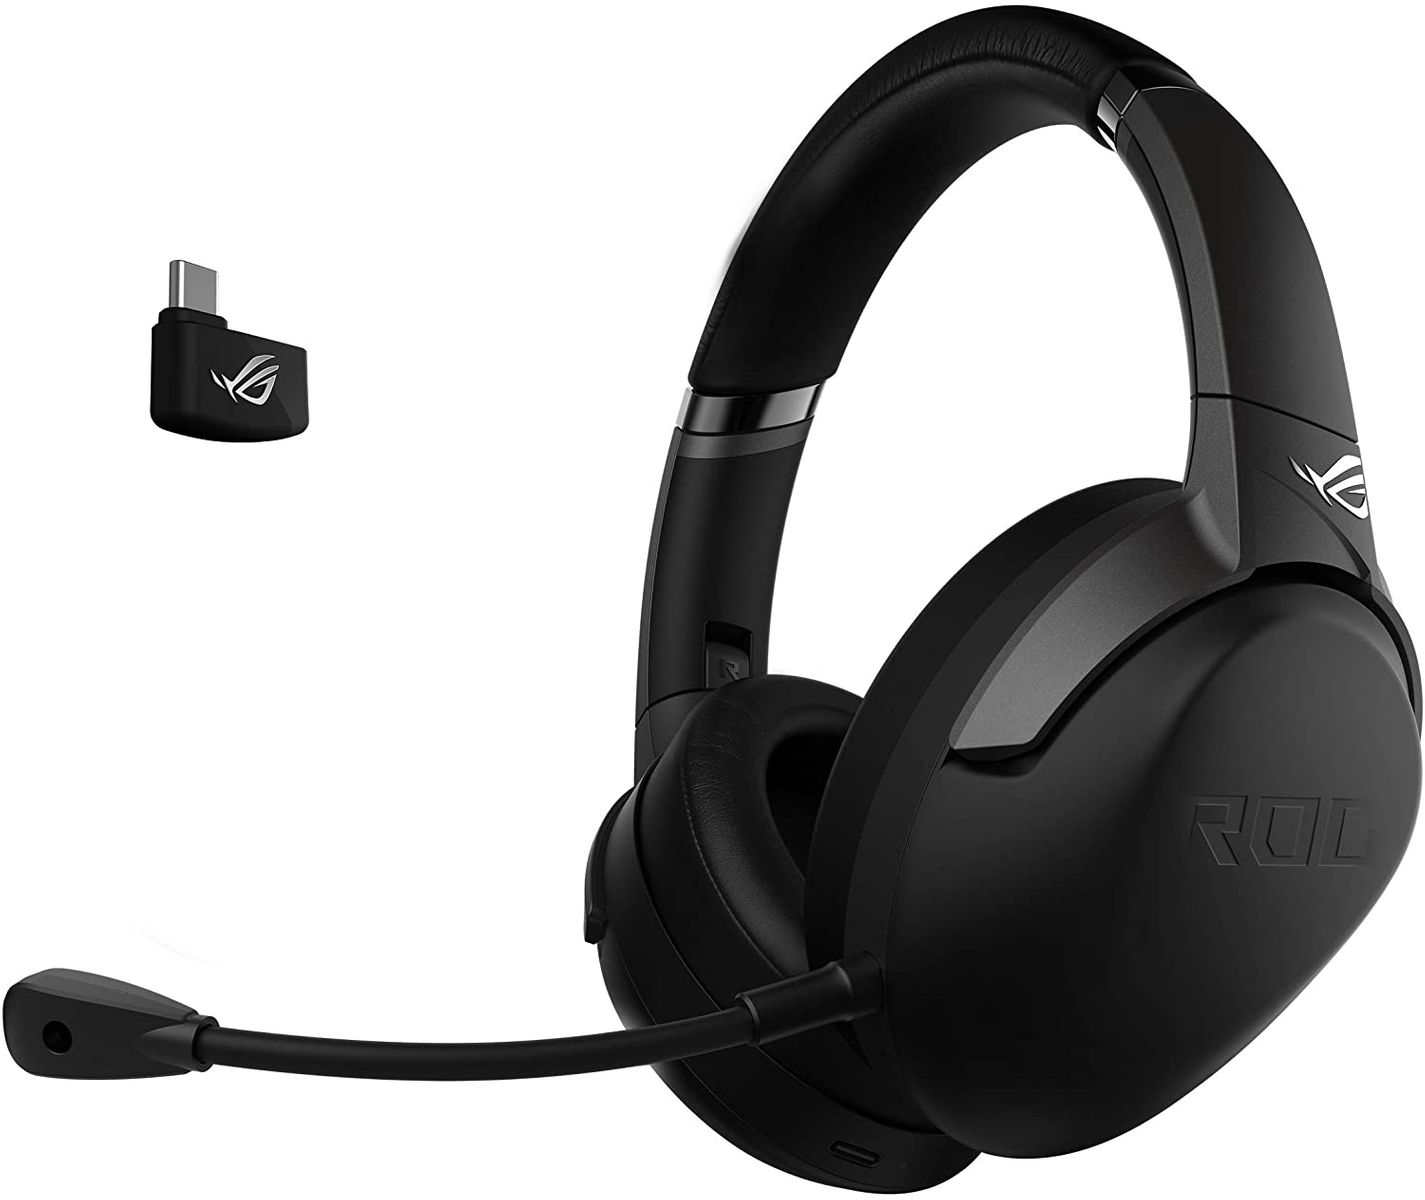 ASUS ROG Strix Go 2.4 Wired/Wireless Gaming Headset Noise-Cancelling-Microphone